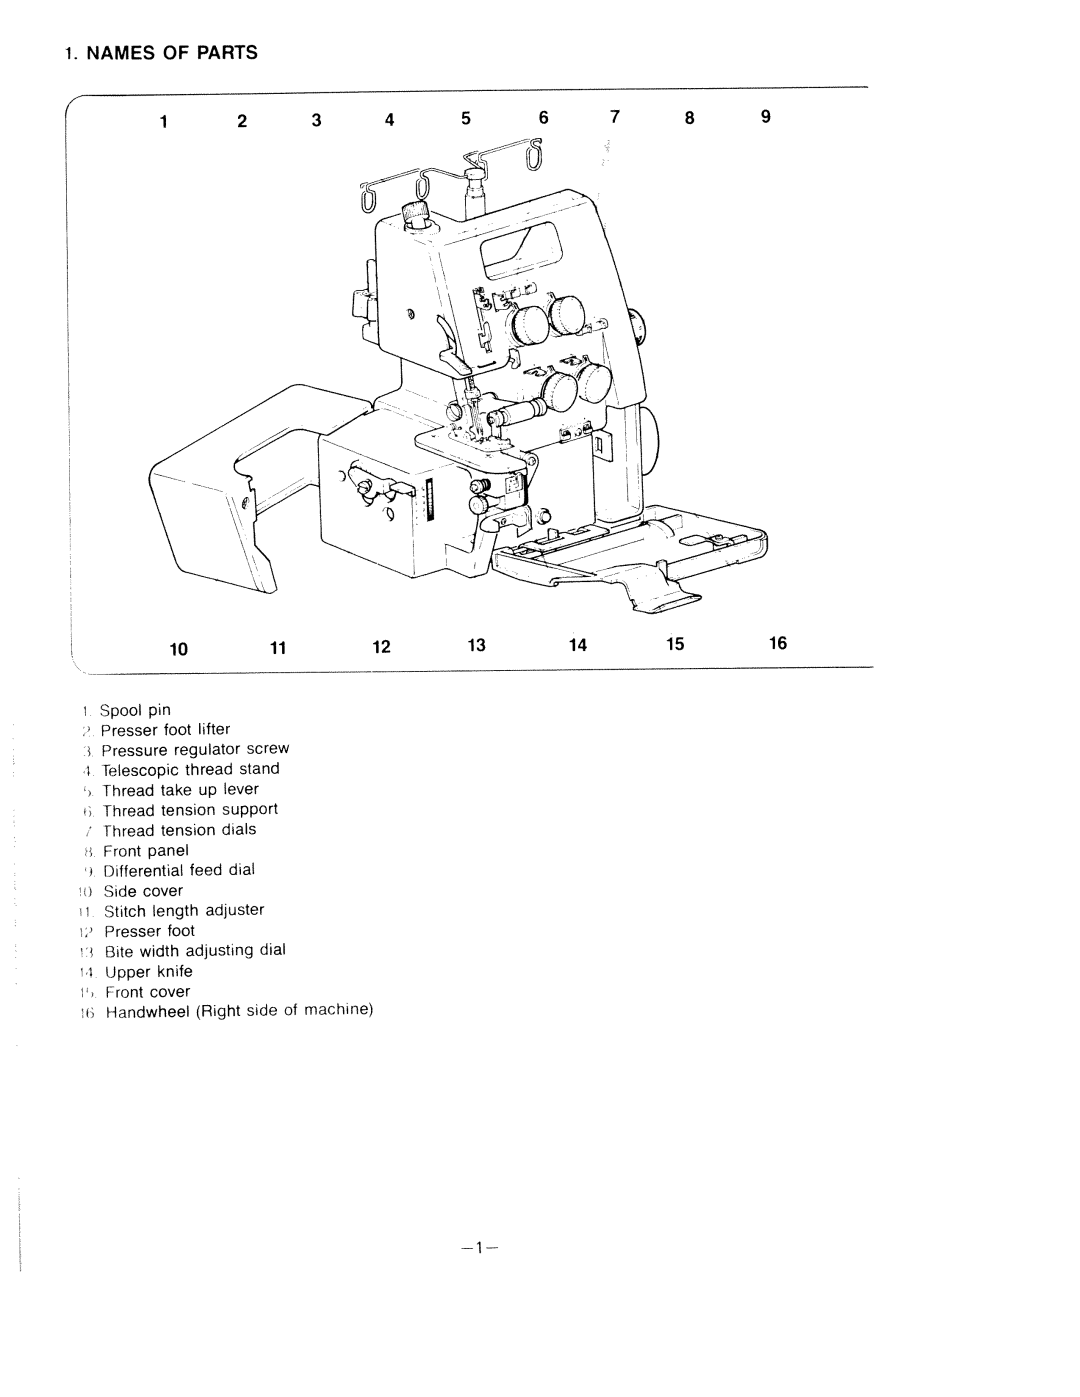 White-Westinghouse WW-6000 manual Names Of Parts, 2Presser foot 